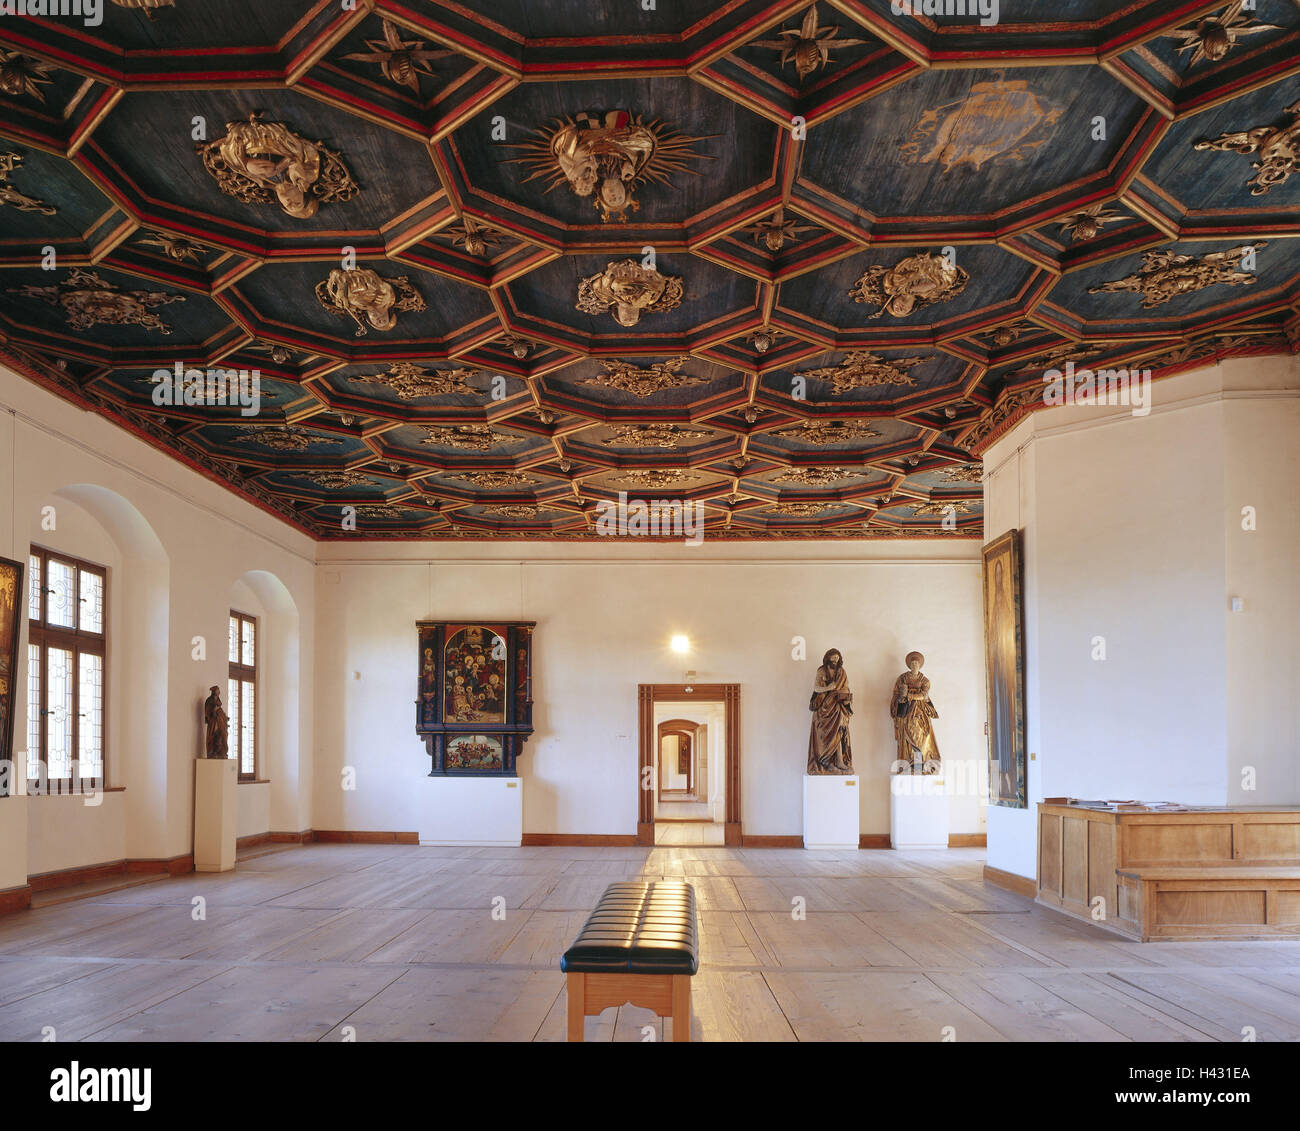 Germany, Bavaria, east Allgäu, to feet, high castle, knight's hall, coffered ceiling, Europe, Allgäu, Swabian, town, structure, architecture, builds in 1486 - in 1505, now state picture gallery, museum, inside, interior shot, interior design, ceiling, cap Stock Photo